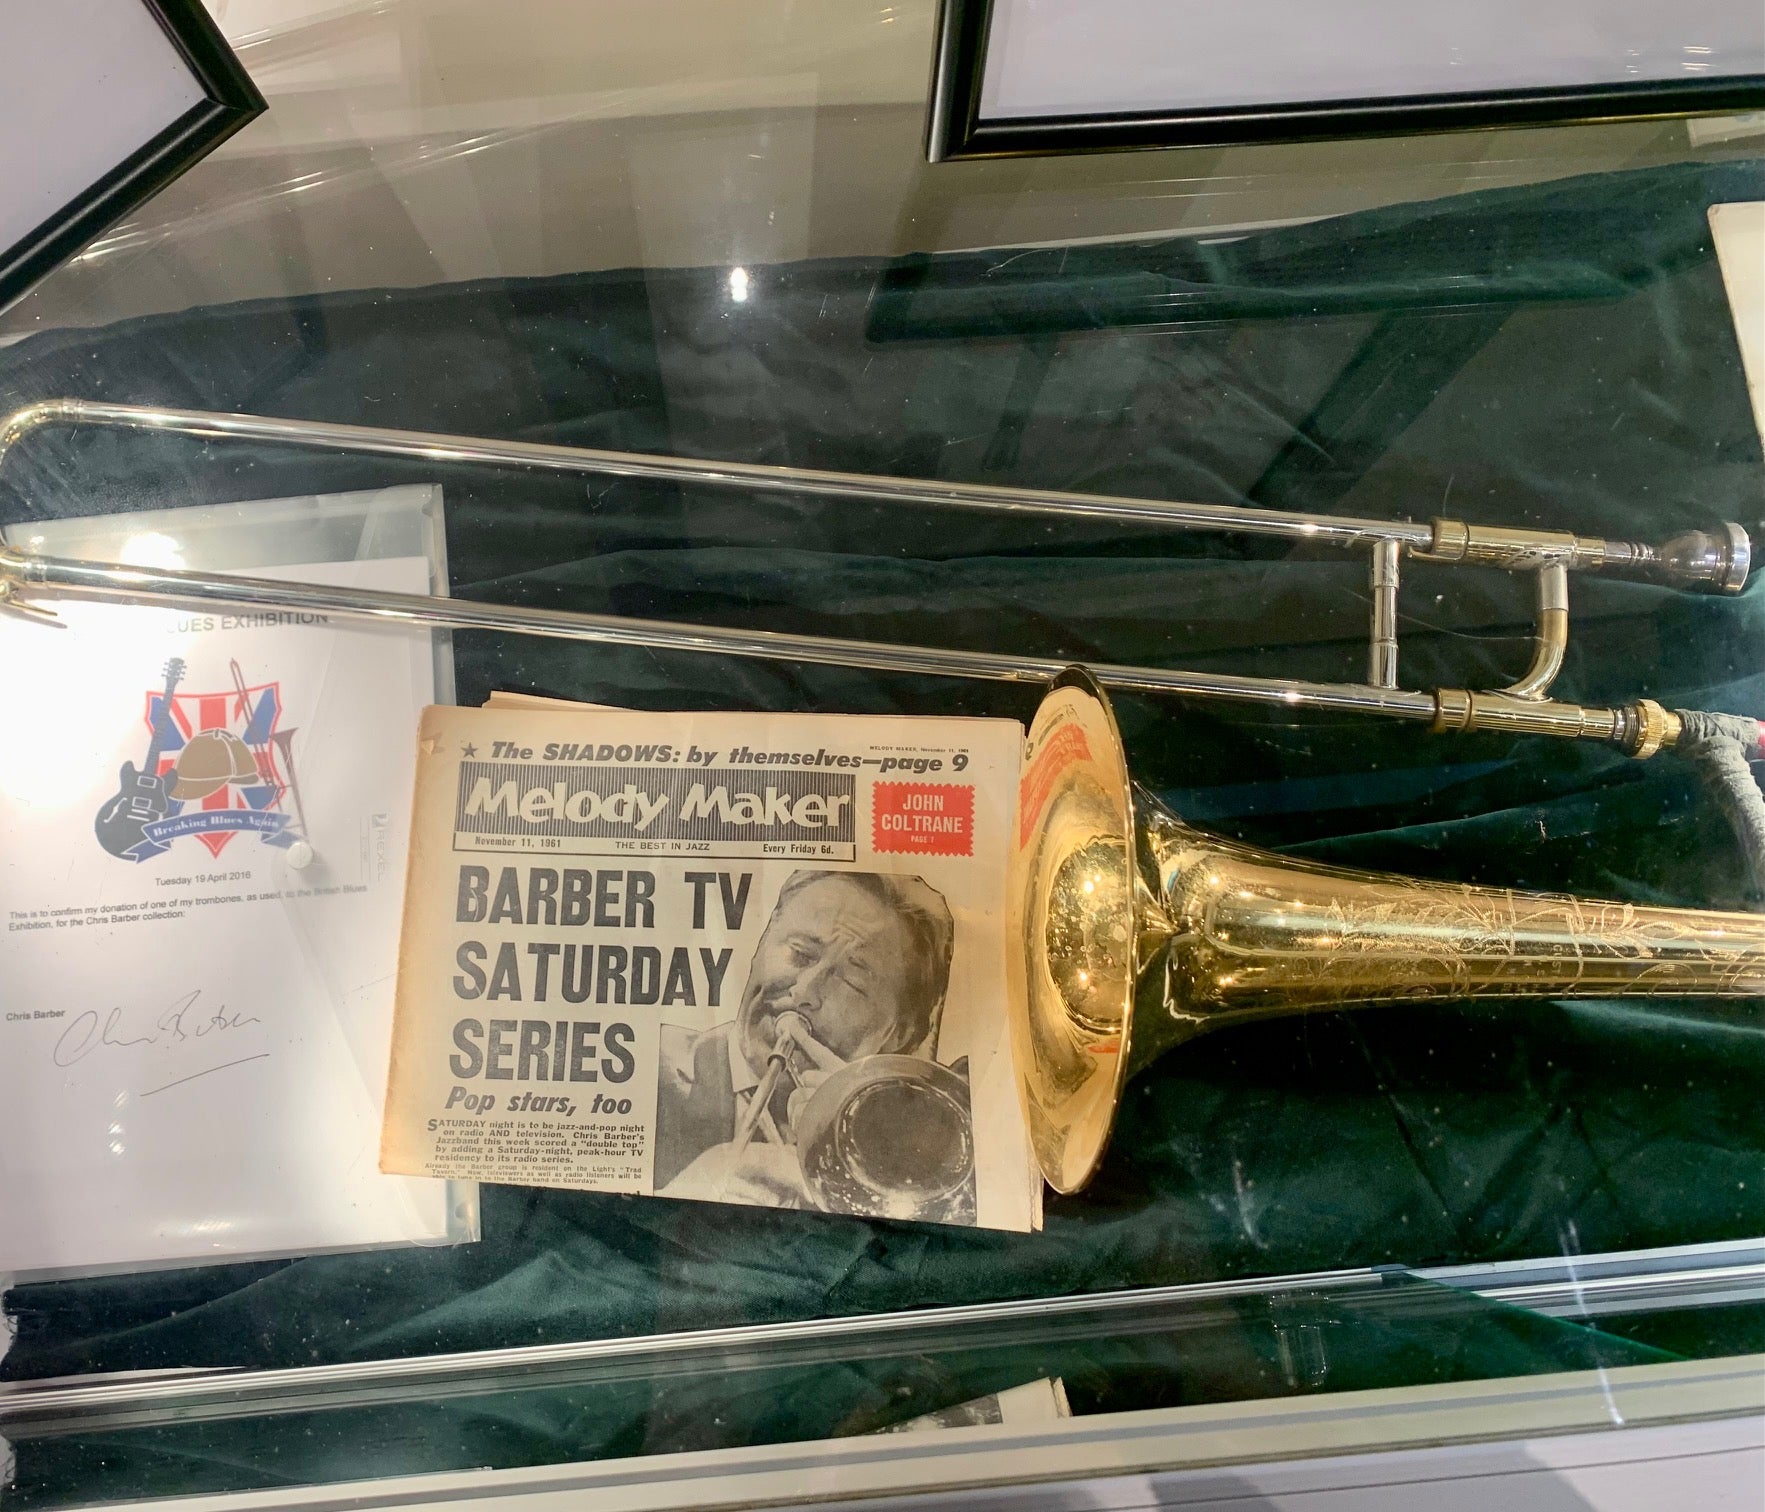 Chris Barber exhibit at the British Blues Exhibition in Brentford